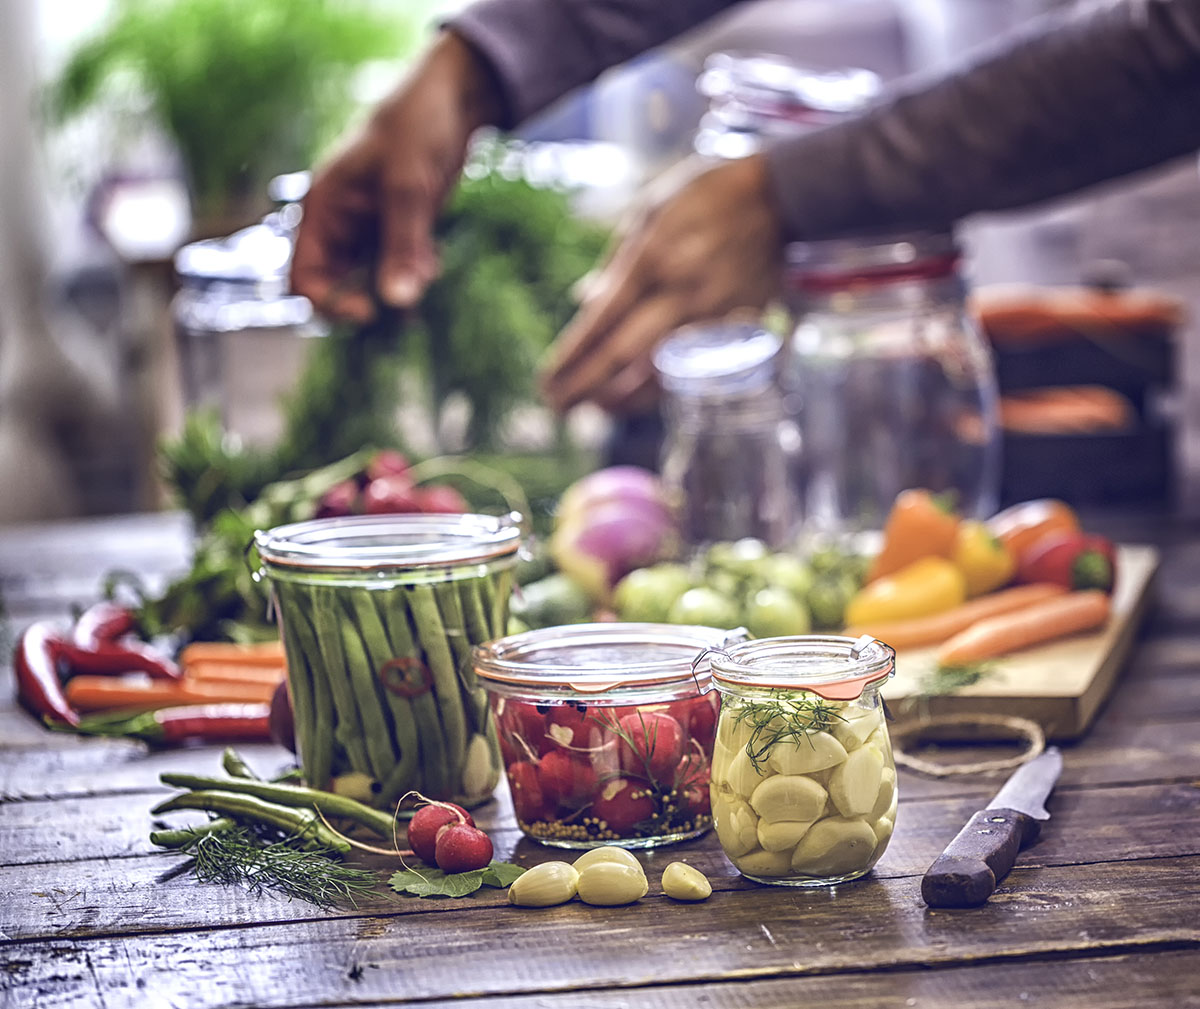 Preserving organic vegetables in jars like grean beans, garlic, carrots, cucumbers, tomatoes, chilis, paprika and radishes.